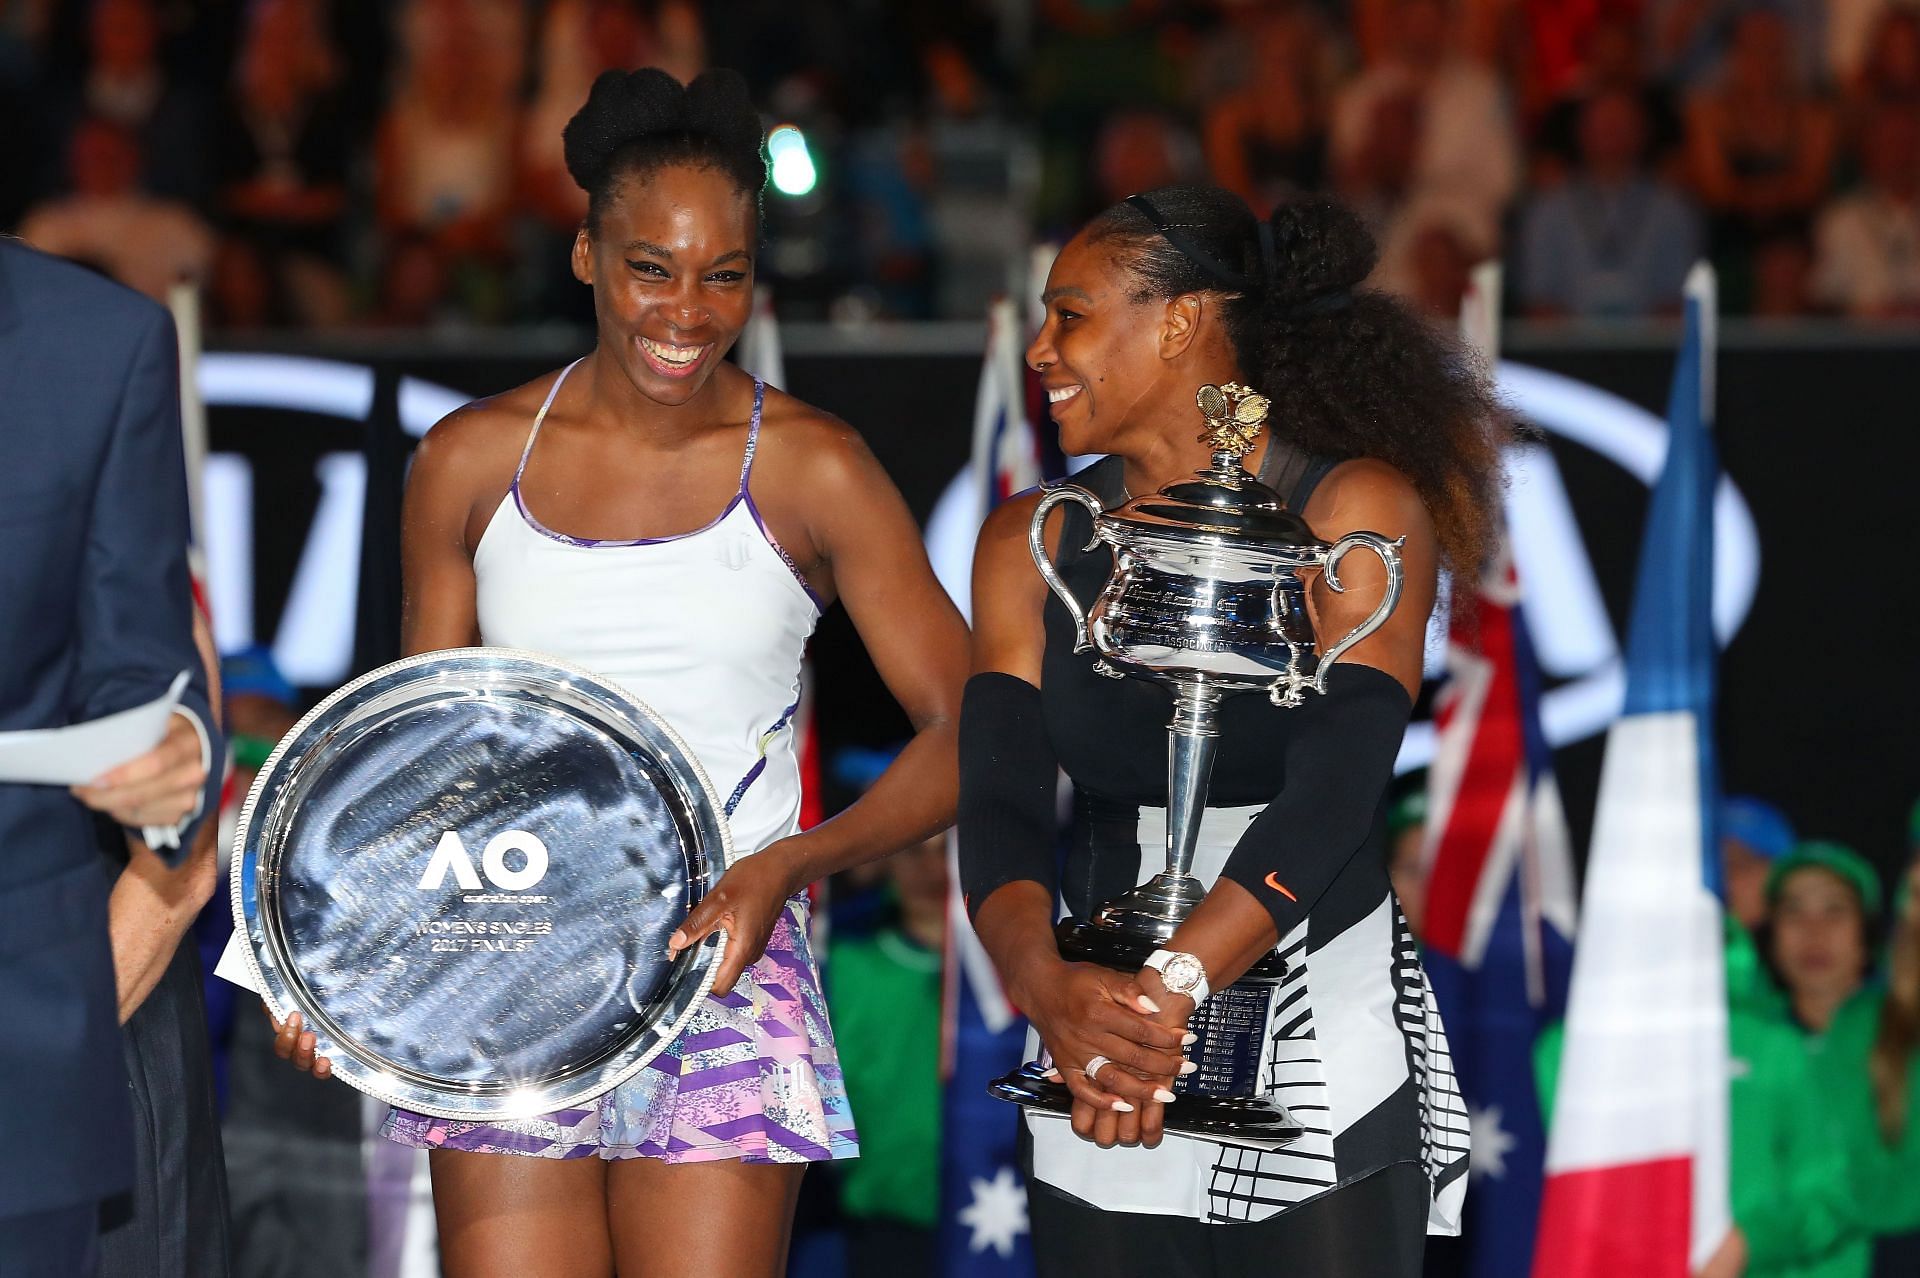 The Williams sisters after the 2017 Australian Open final